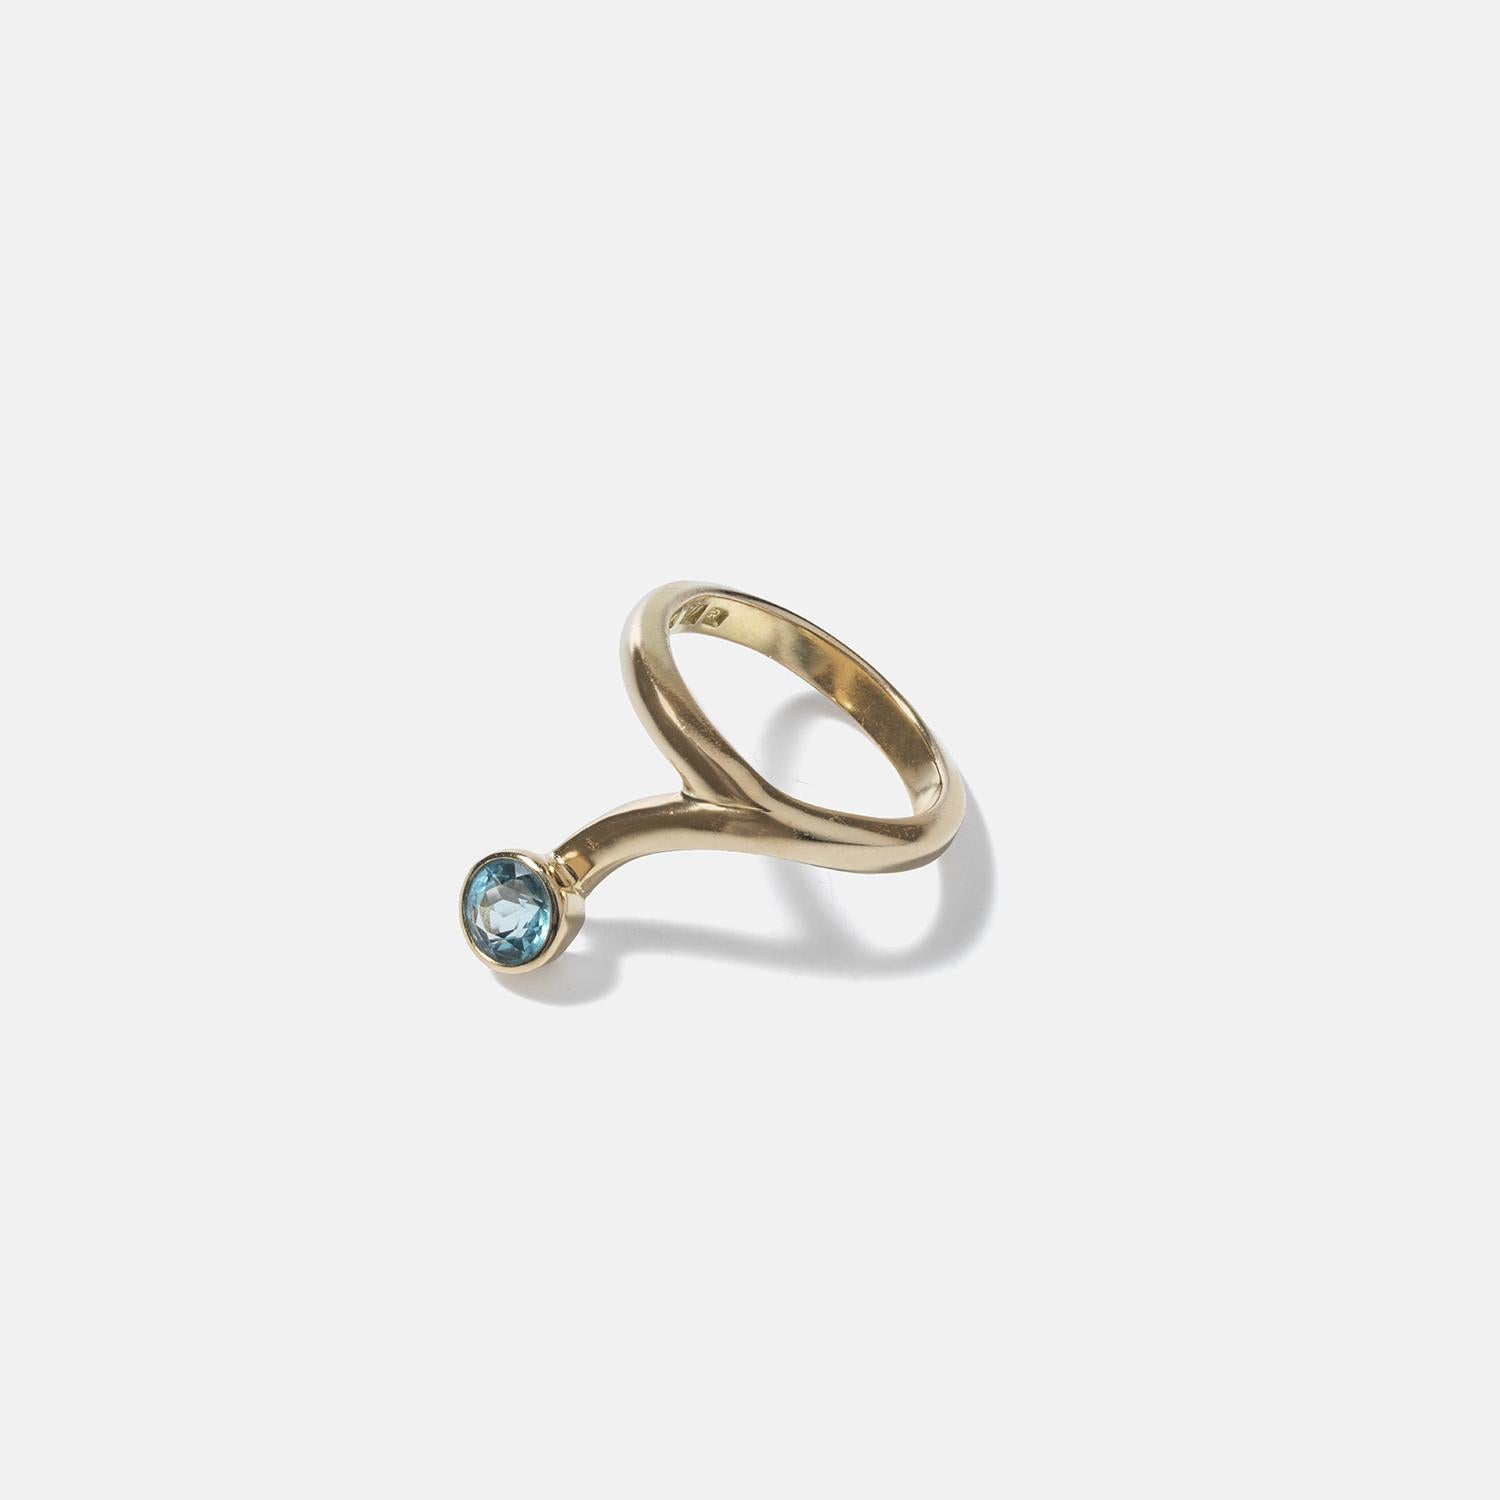 This 18-karat gold ring has a round turquoise stone embedded at the end, adding a vibrant contrast to the gold. The band spirals around the finger in a snake-like manner, giving it an exotic and oriental touch. The gold has a high polish, enhancing